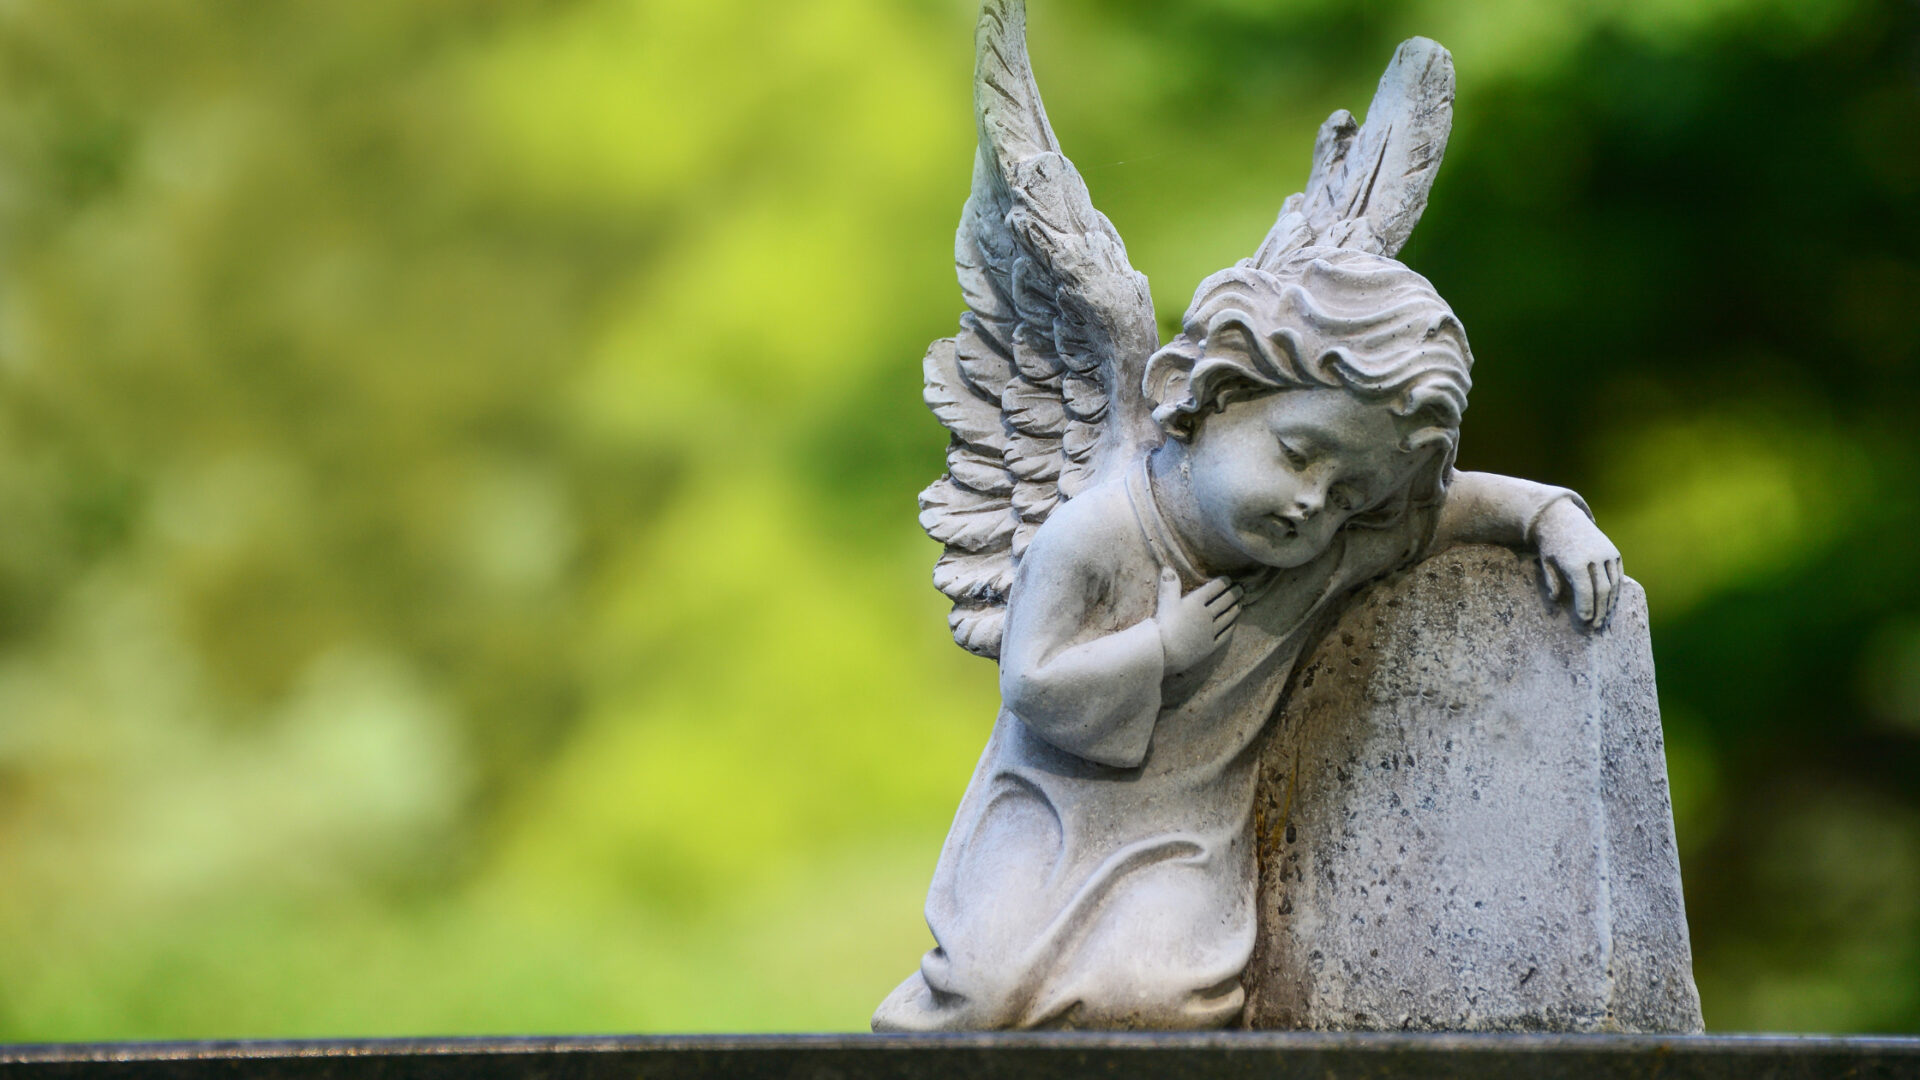 A baby angel statue with wings